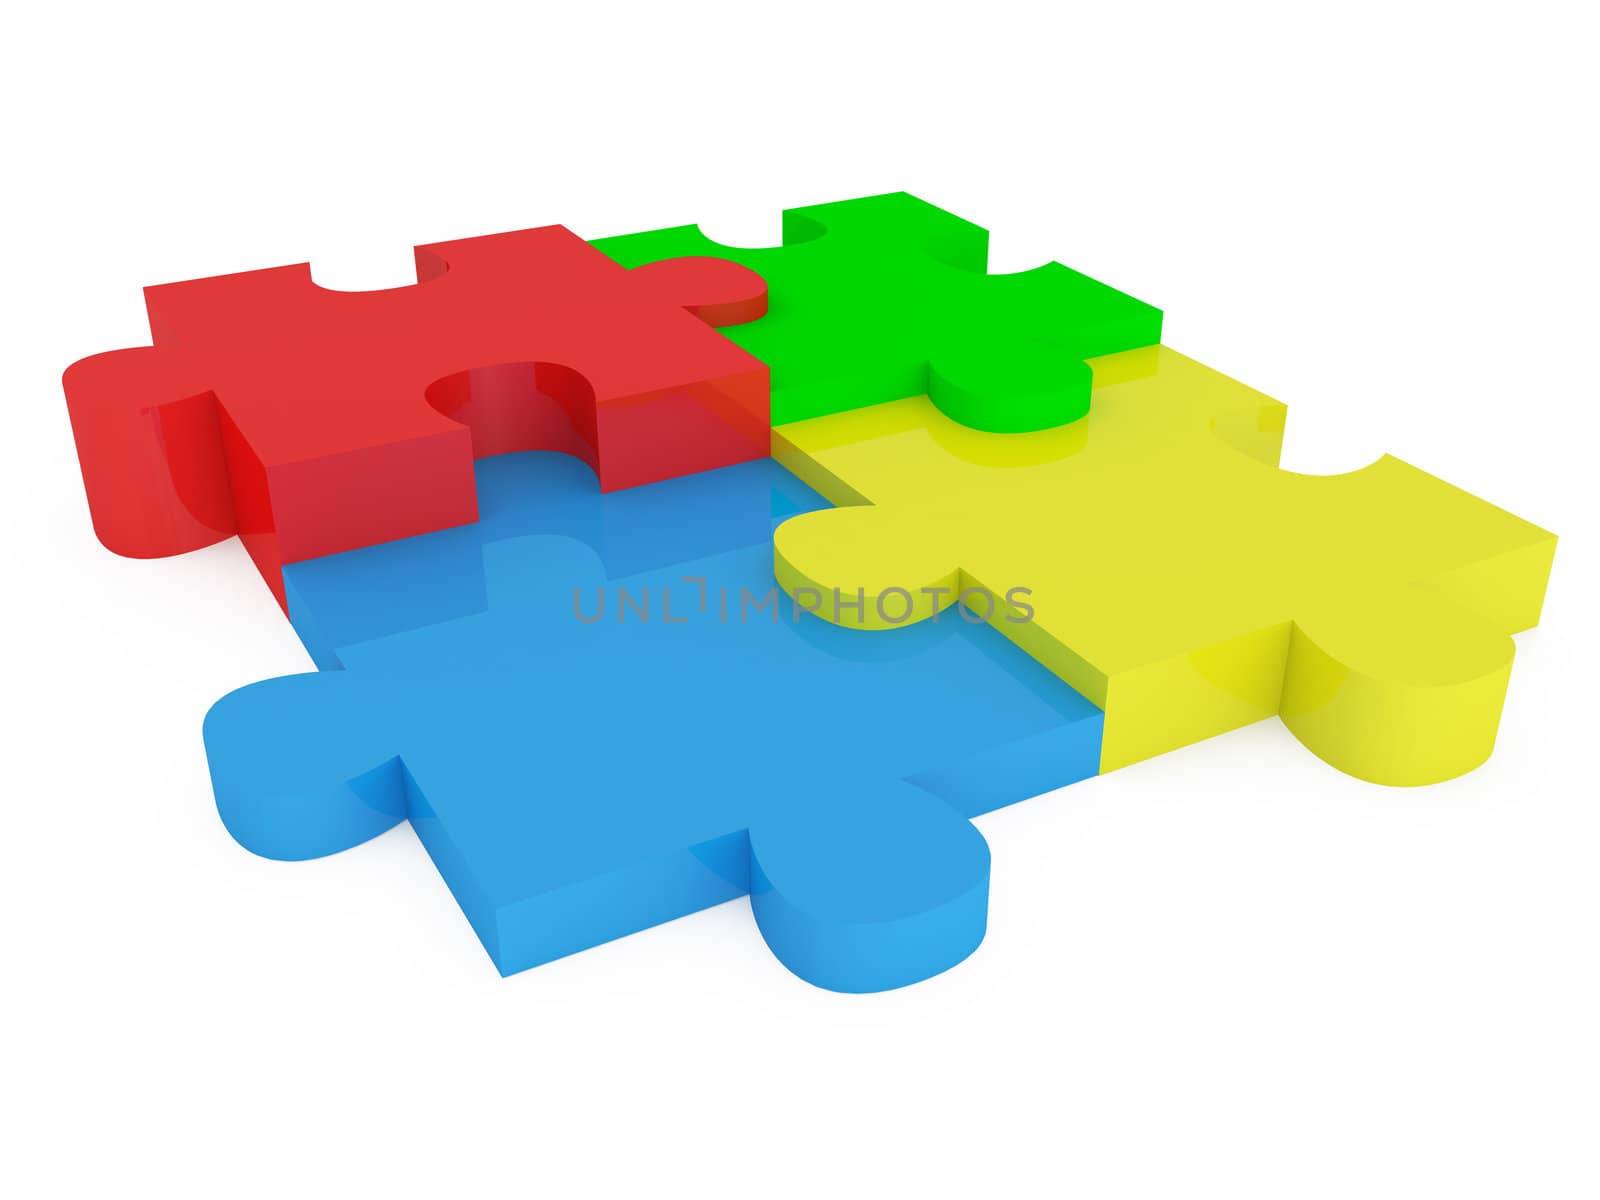 Four colorful puzzle pieces on white background.